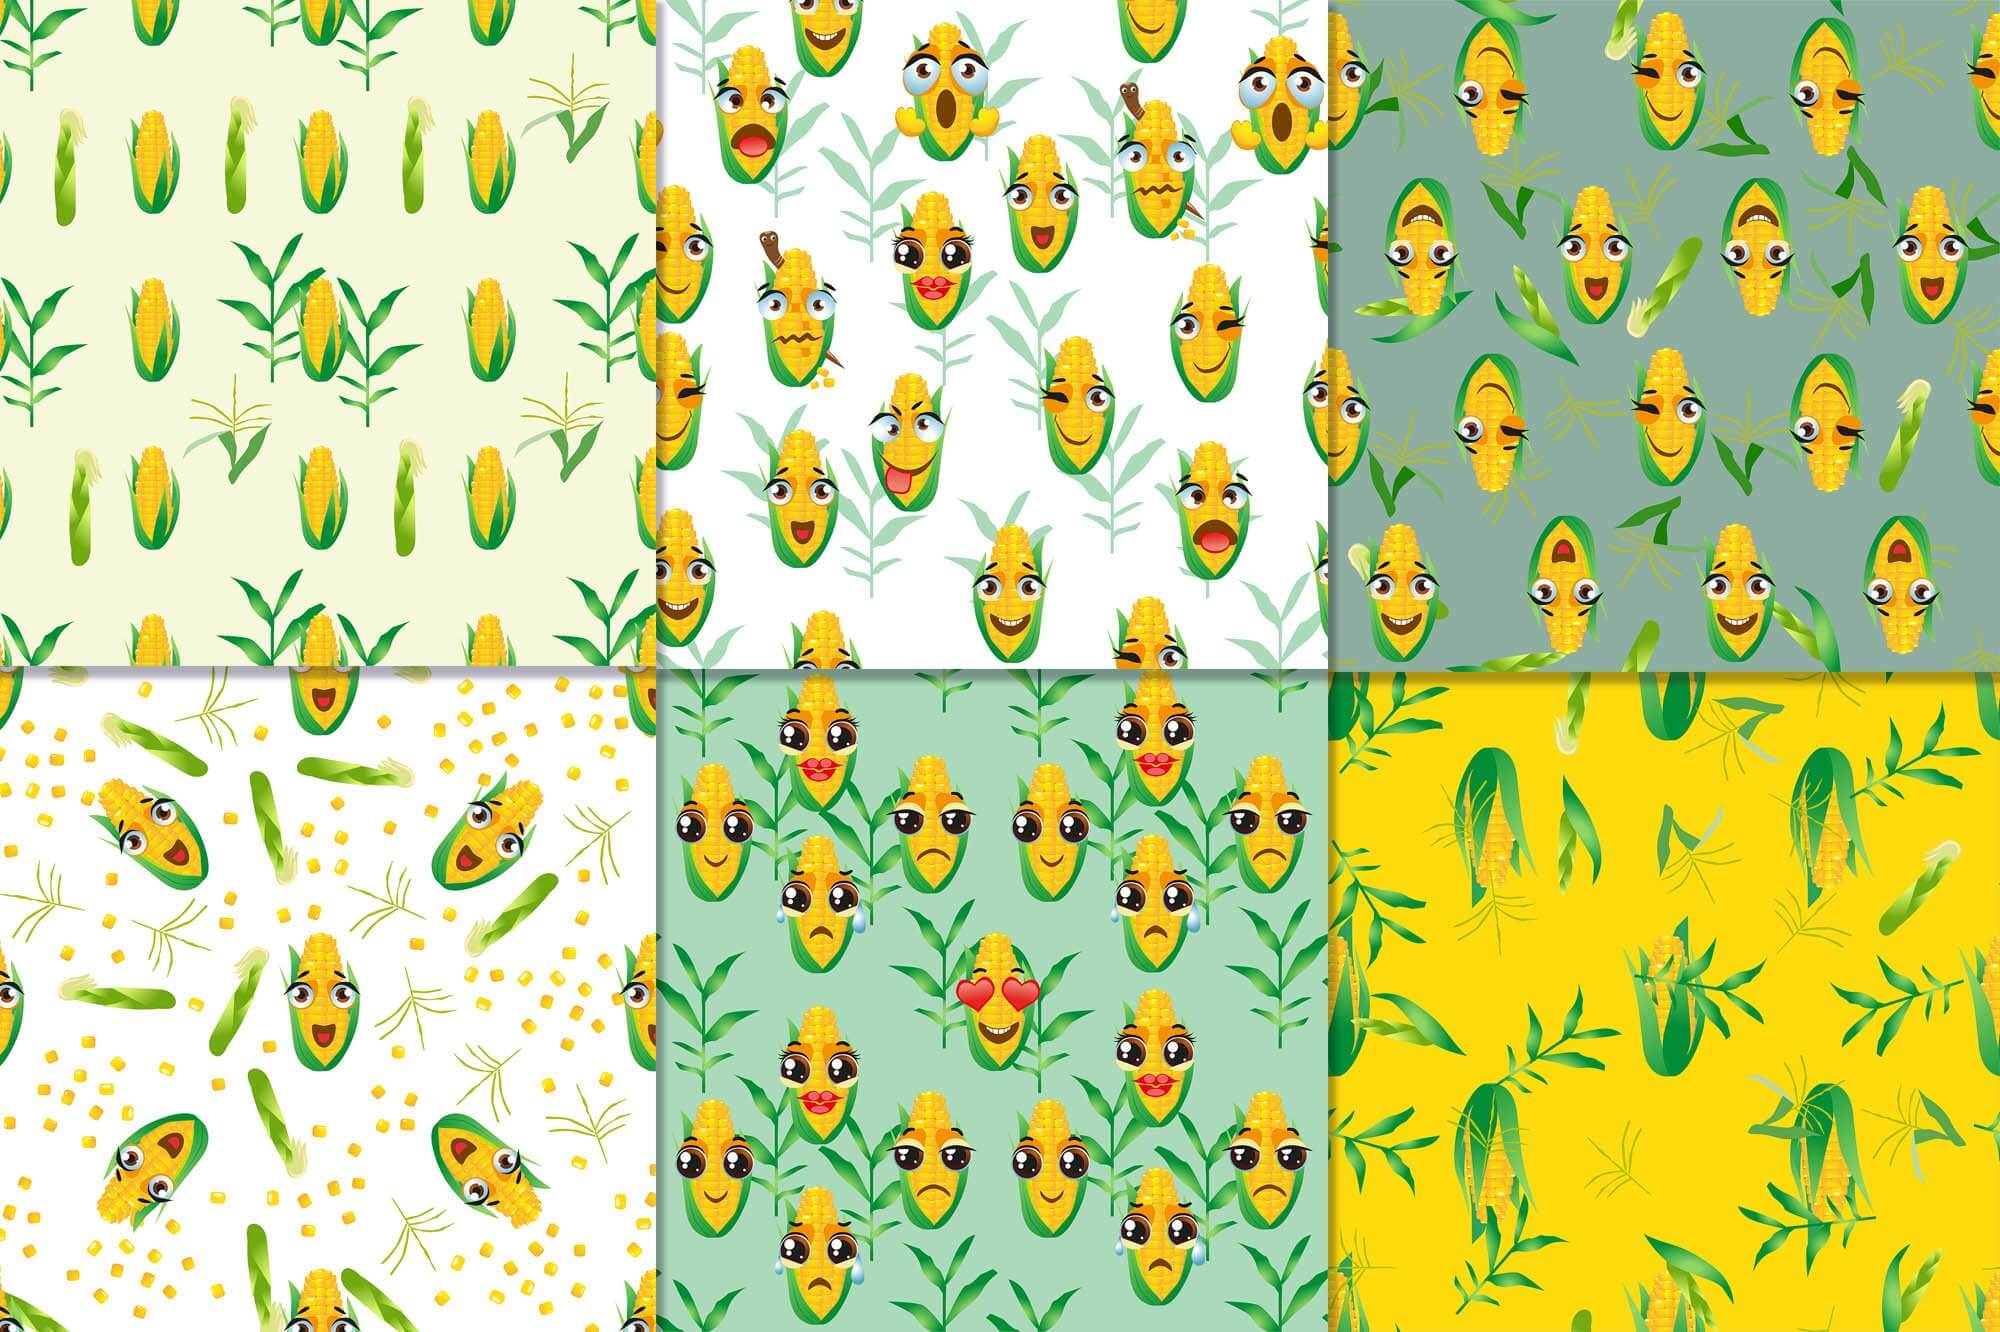 Cartoon corn on backgrounds of different colors.